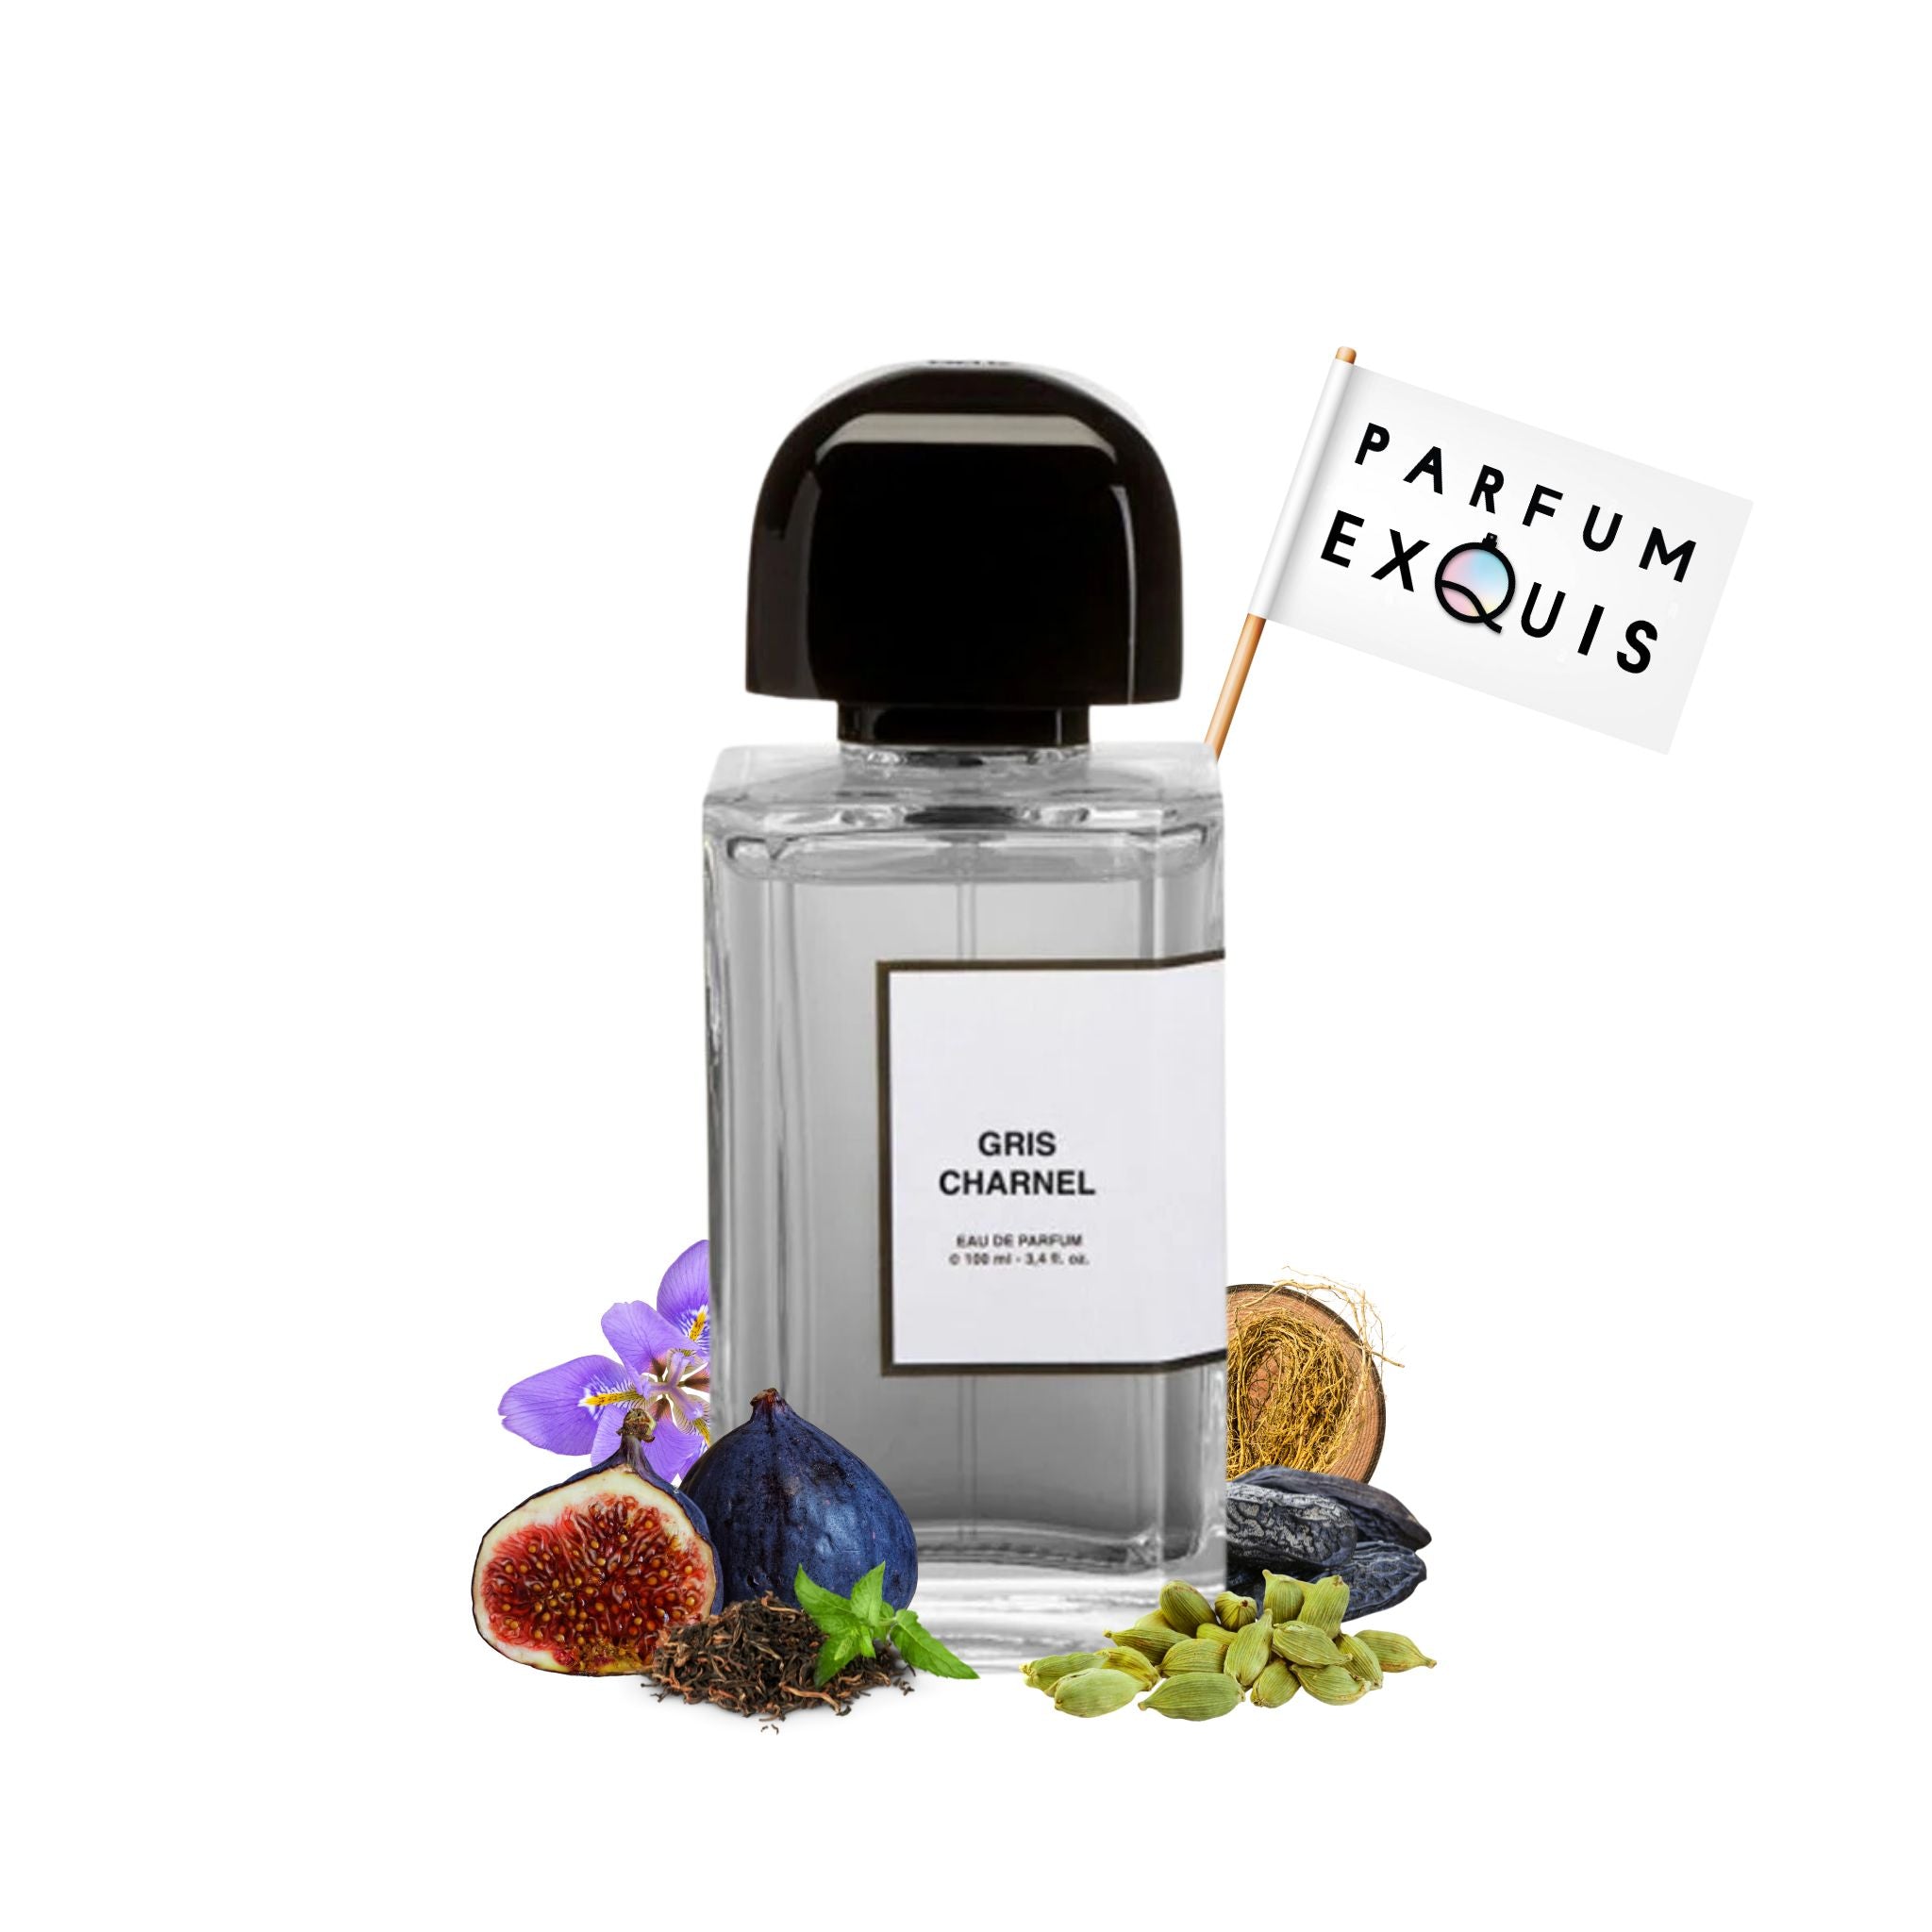 Women's Perfumes - Discover Your Signature Scent from Our 